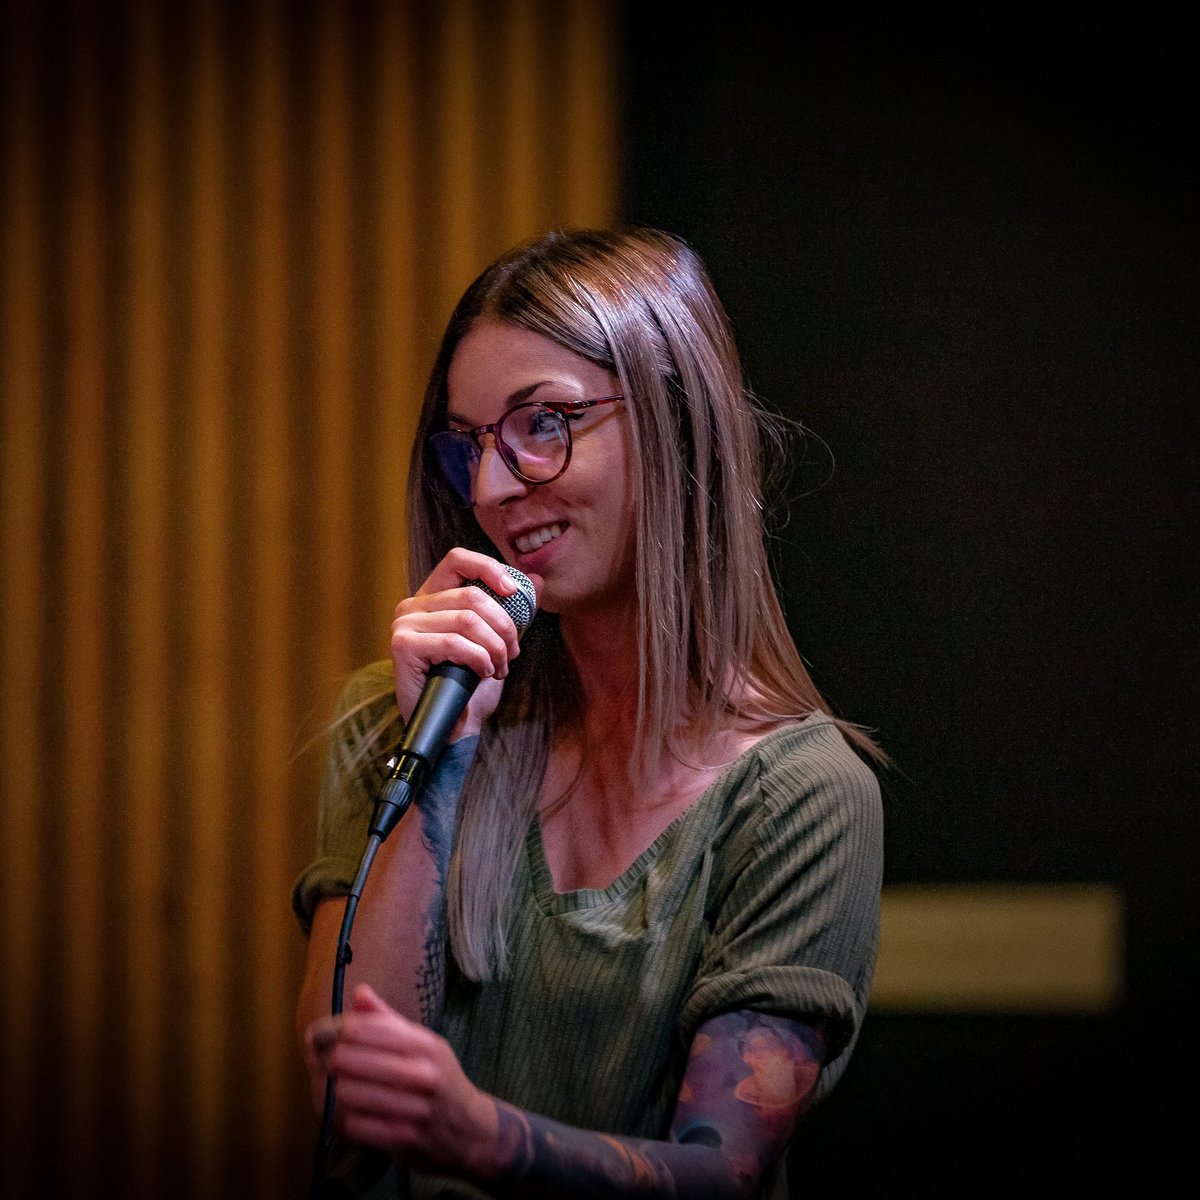 @evrahrose completes our Marquee line up for 2023 and releases her new EP today!! #grassrootsplayingharder
#poetry #author #musician 
#spokenword #Wrexham #wearethecaemusicfestival